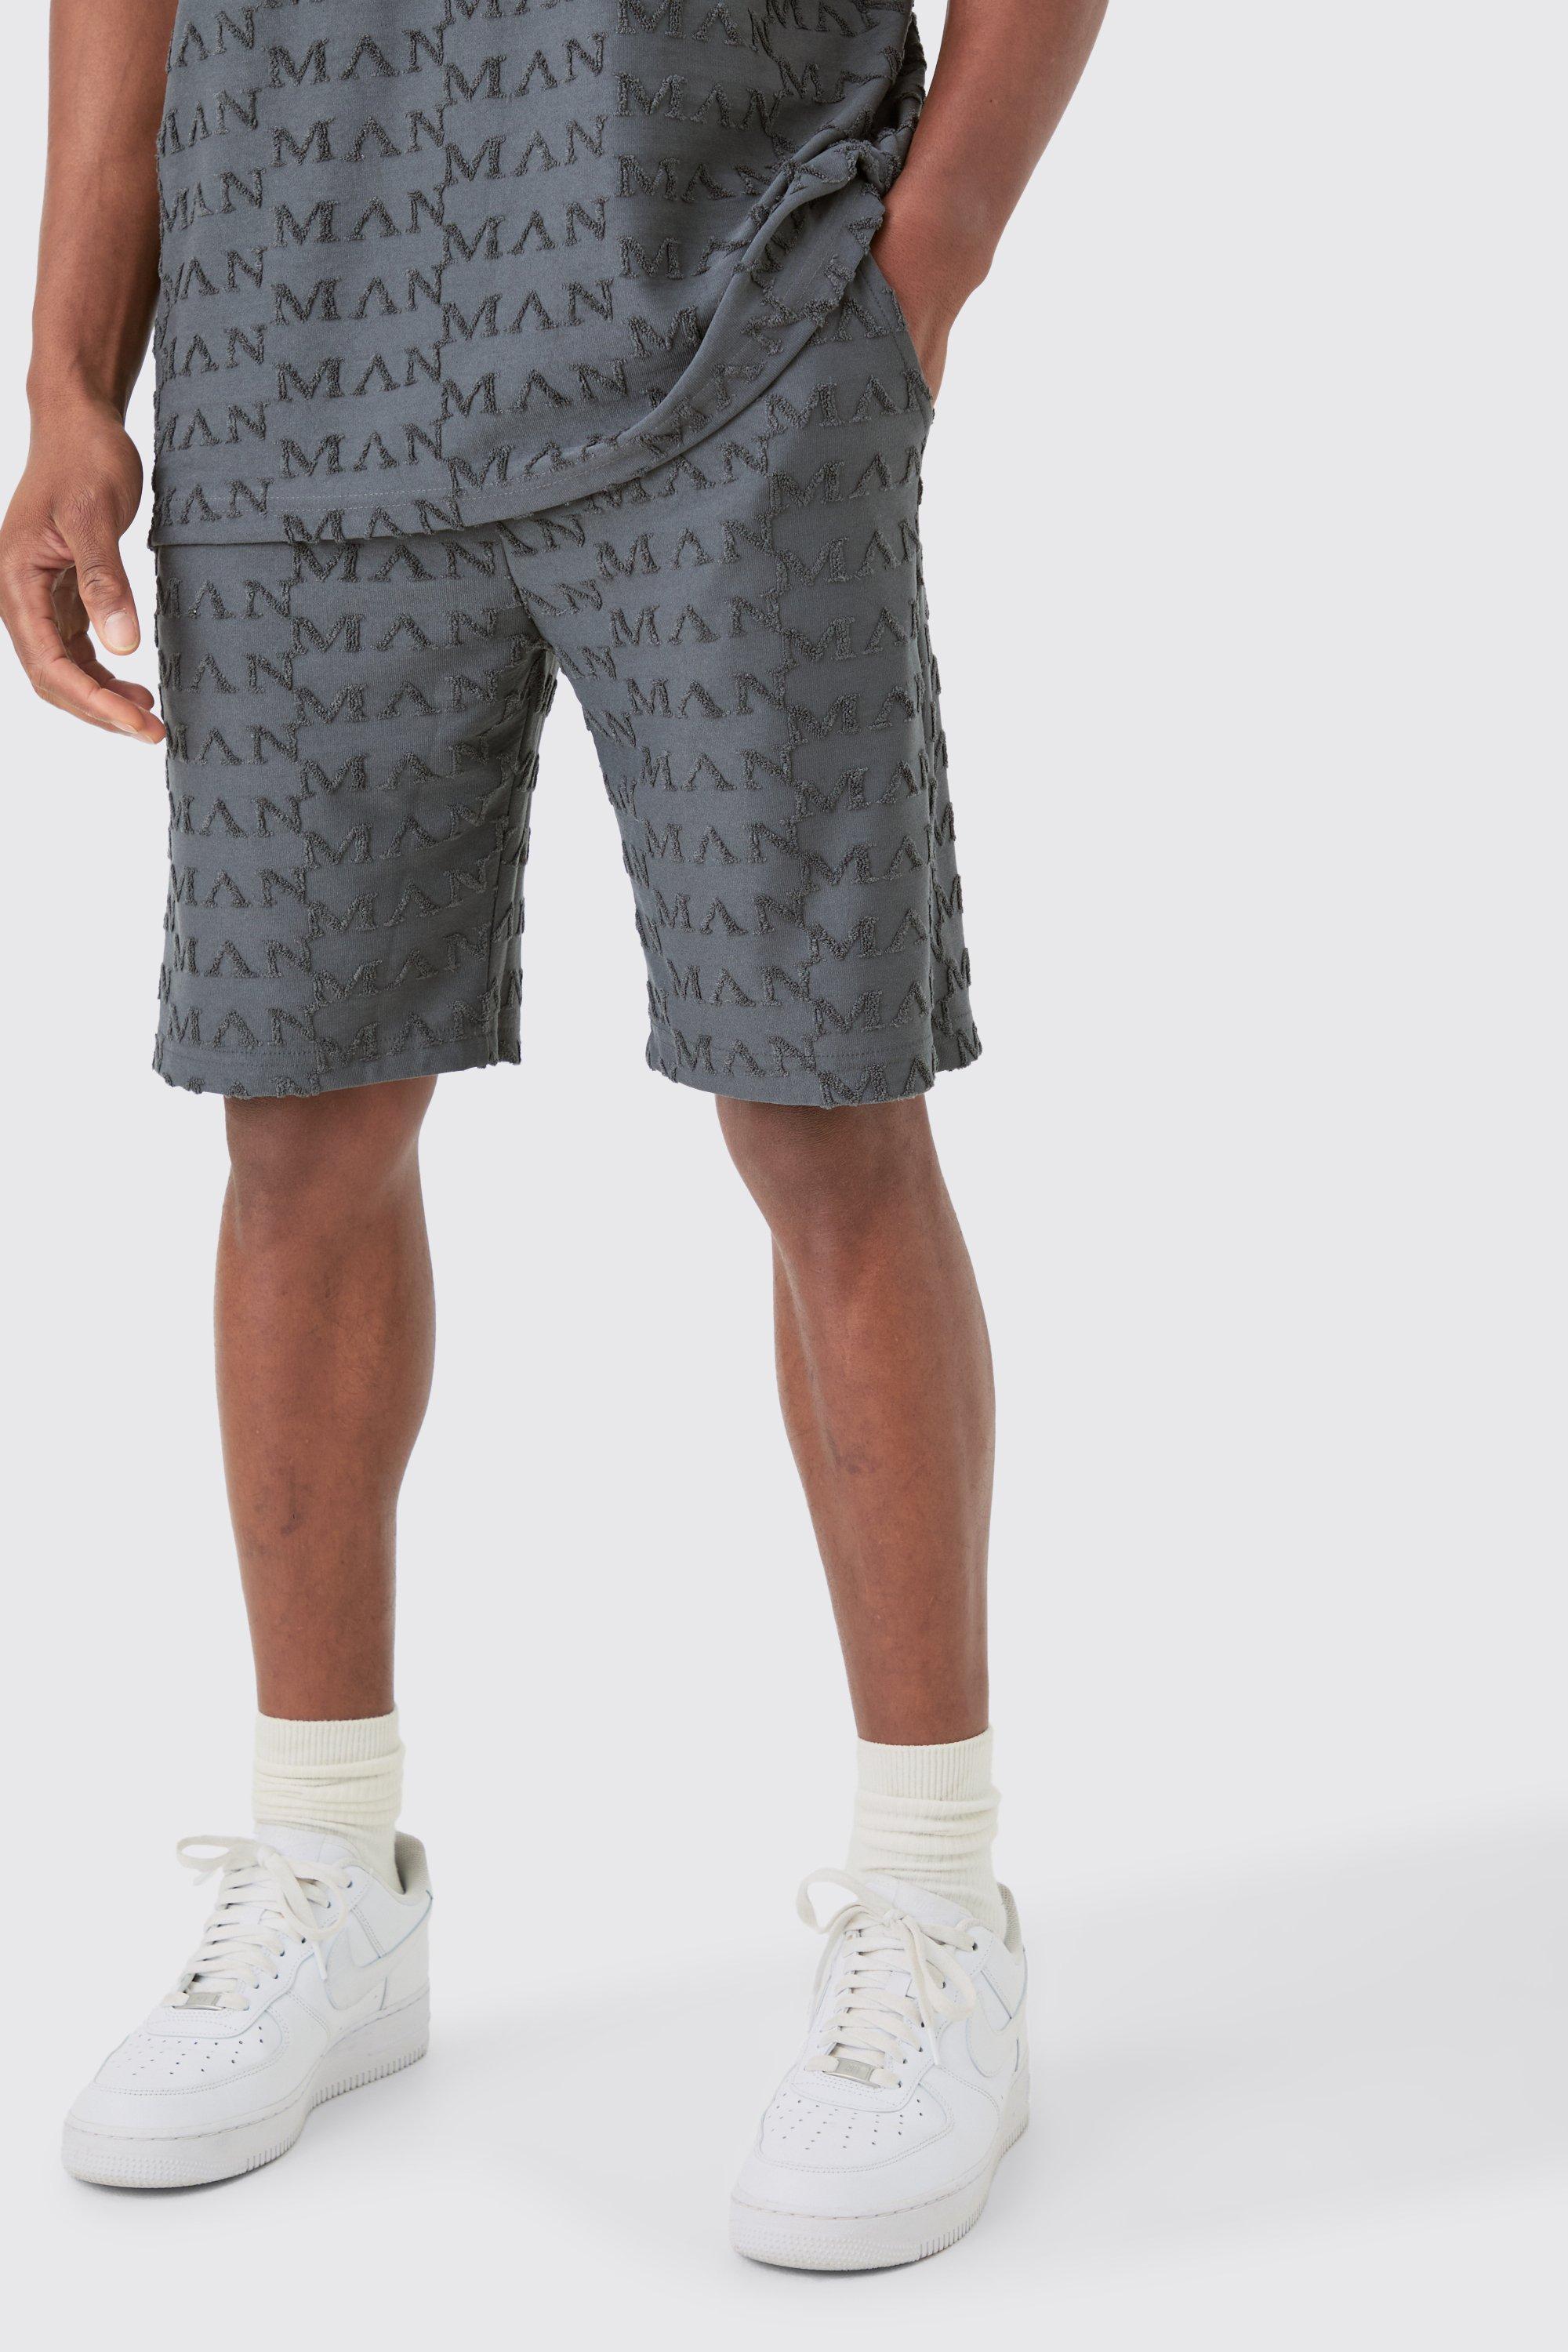 Image of Loose Fit Man Towelling Jacquard Shorts, Grigio